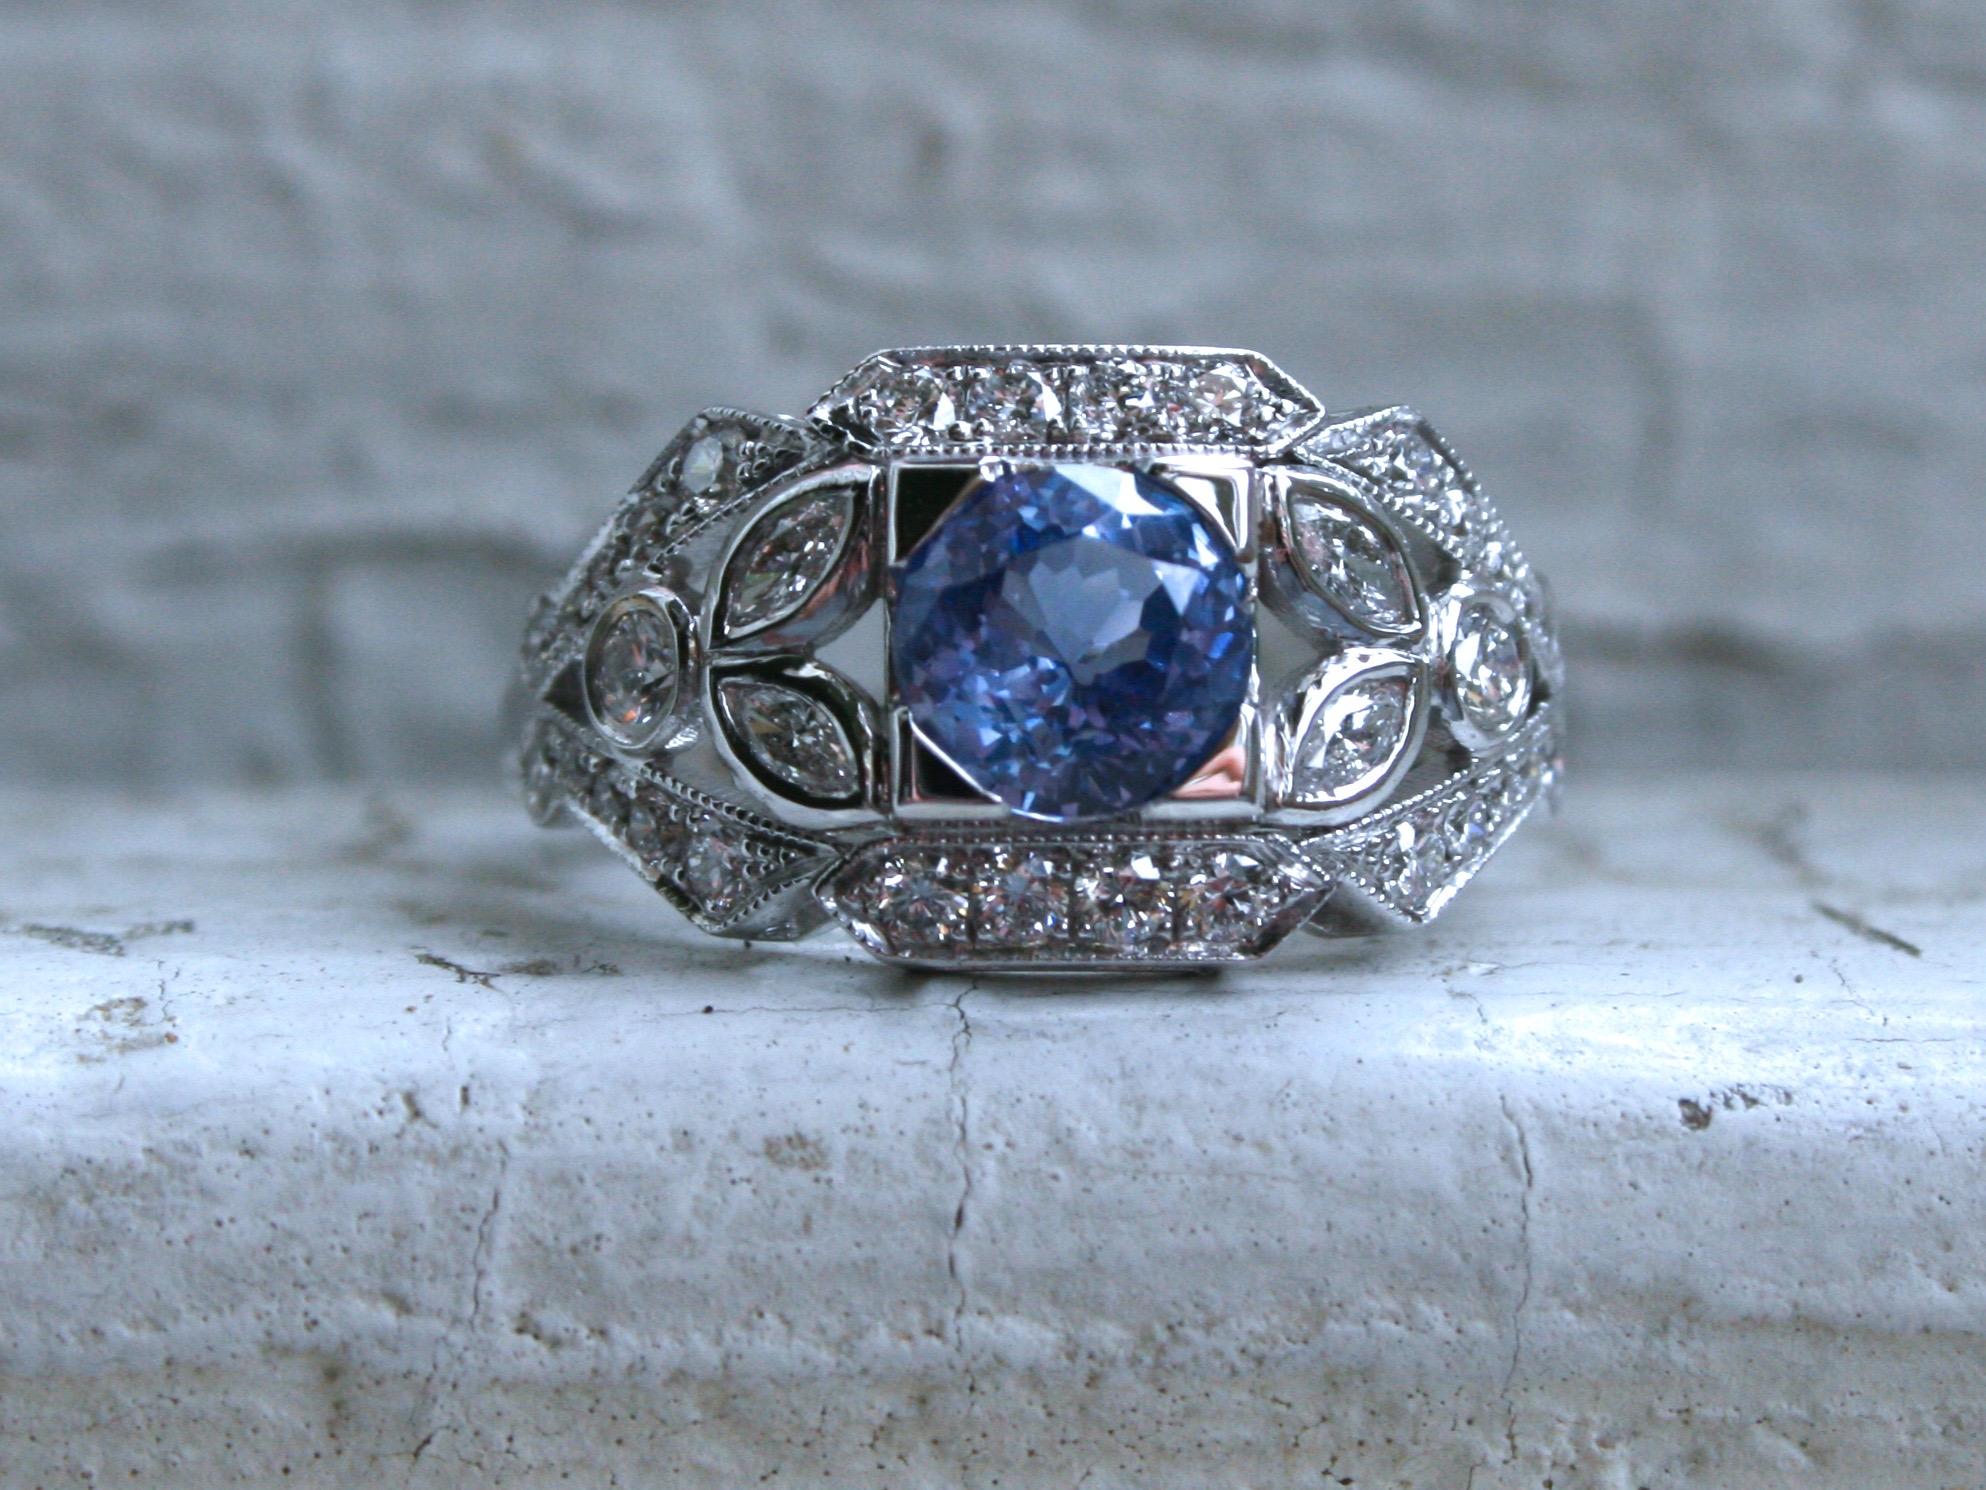 I LOVE the vintage design of this Round Sapphire Floral Diamond Ring Engagement Ring Wedding Ring! Simply stunning, and the sparkle is amazing! The design is a unique vintage floral design, with diamond studded open work, beaded edges, and a